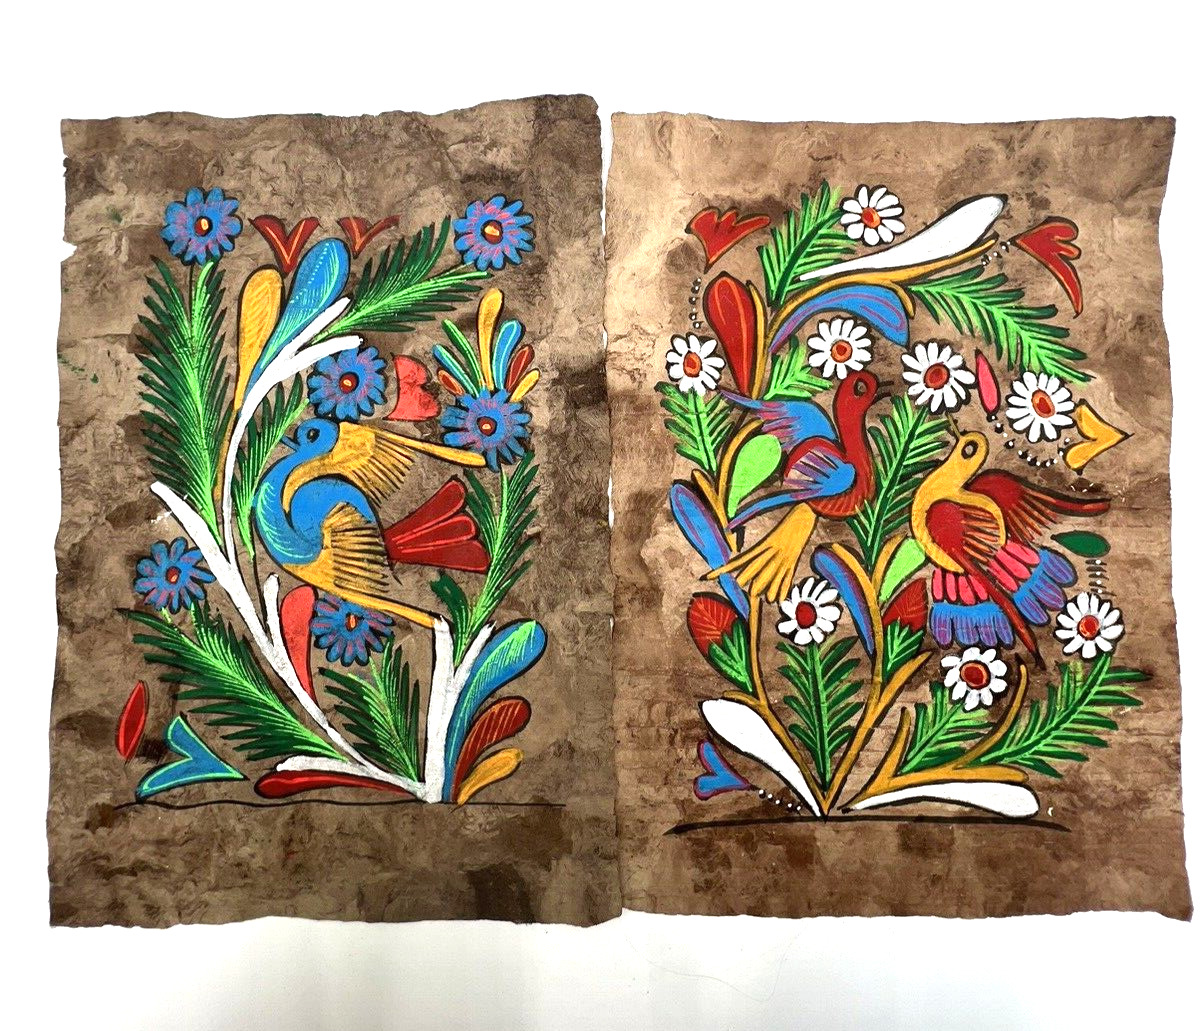 Lot of 2 Vintage Mexican Amate Bark Painting Hand Painted Folk Art Bird Flowers